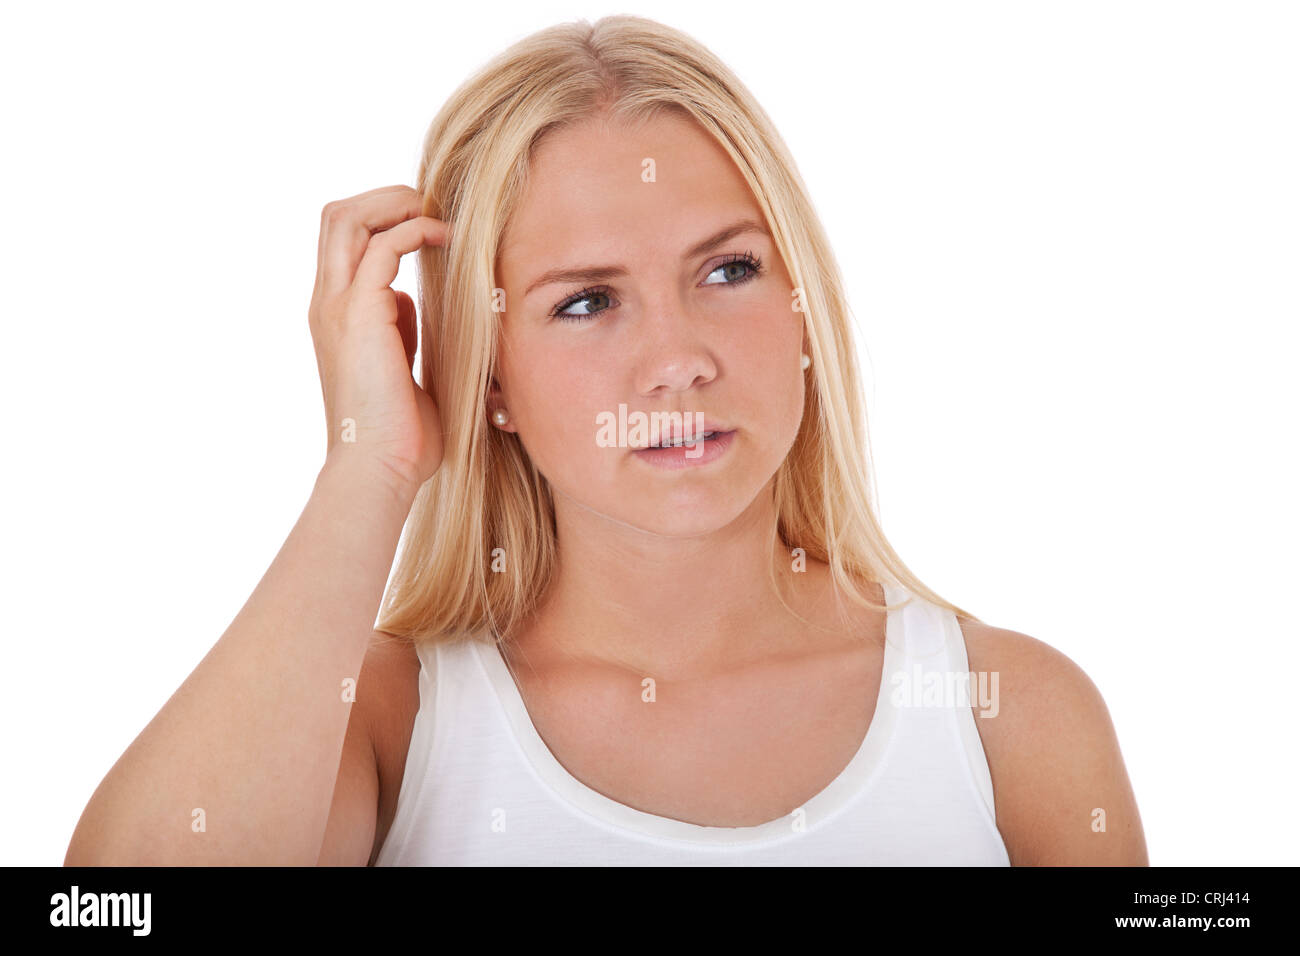 Attractive teenage girl deliberates a decision. All on white background. Stock Photo